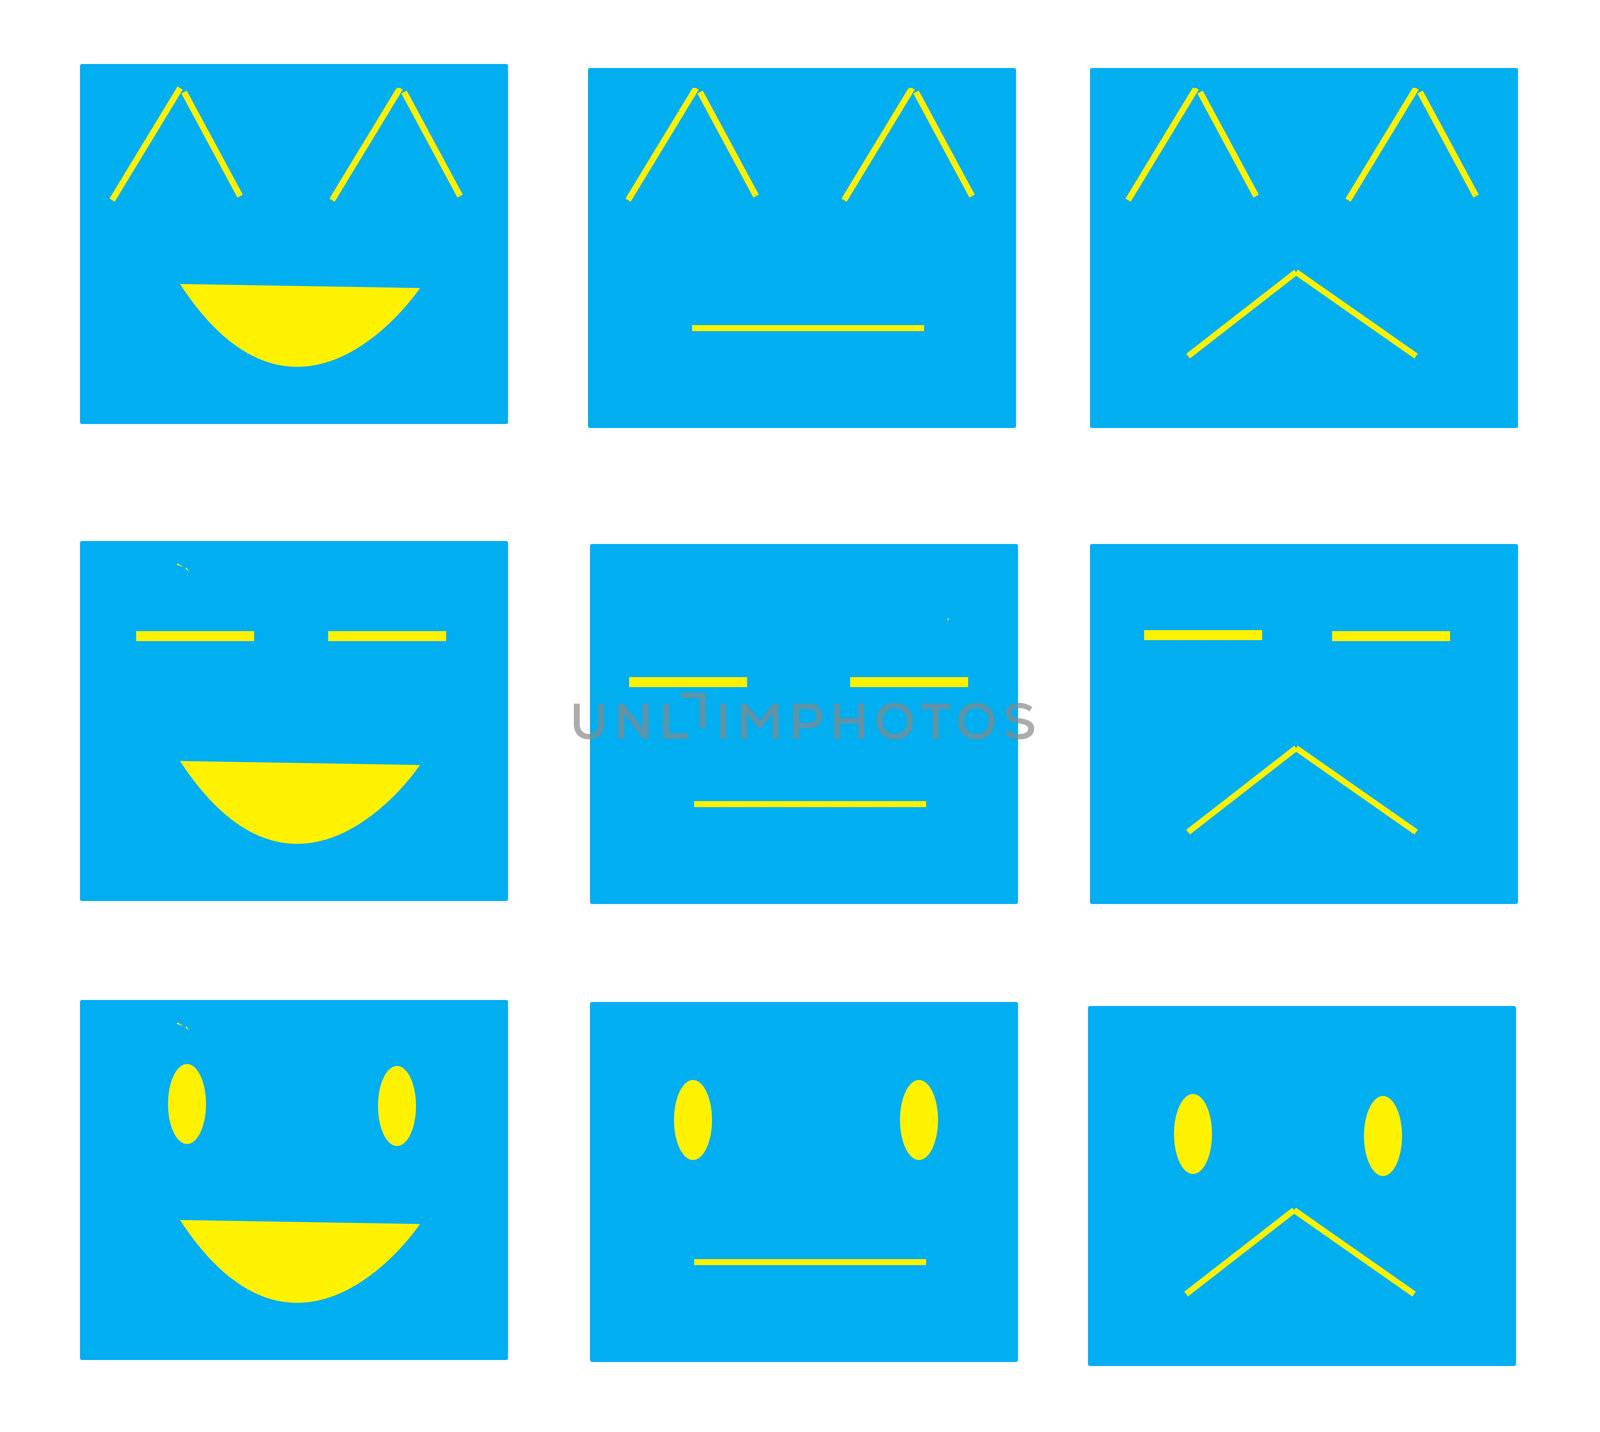 Set of faces with various emotion expressions